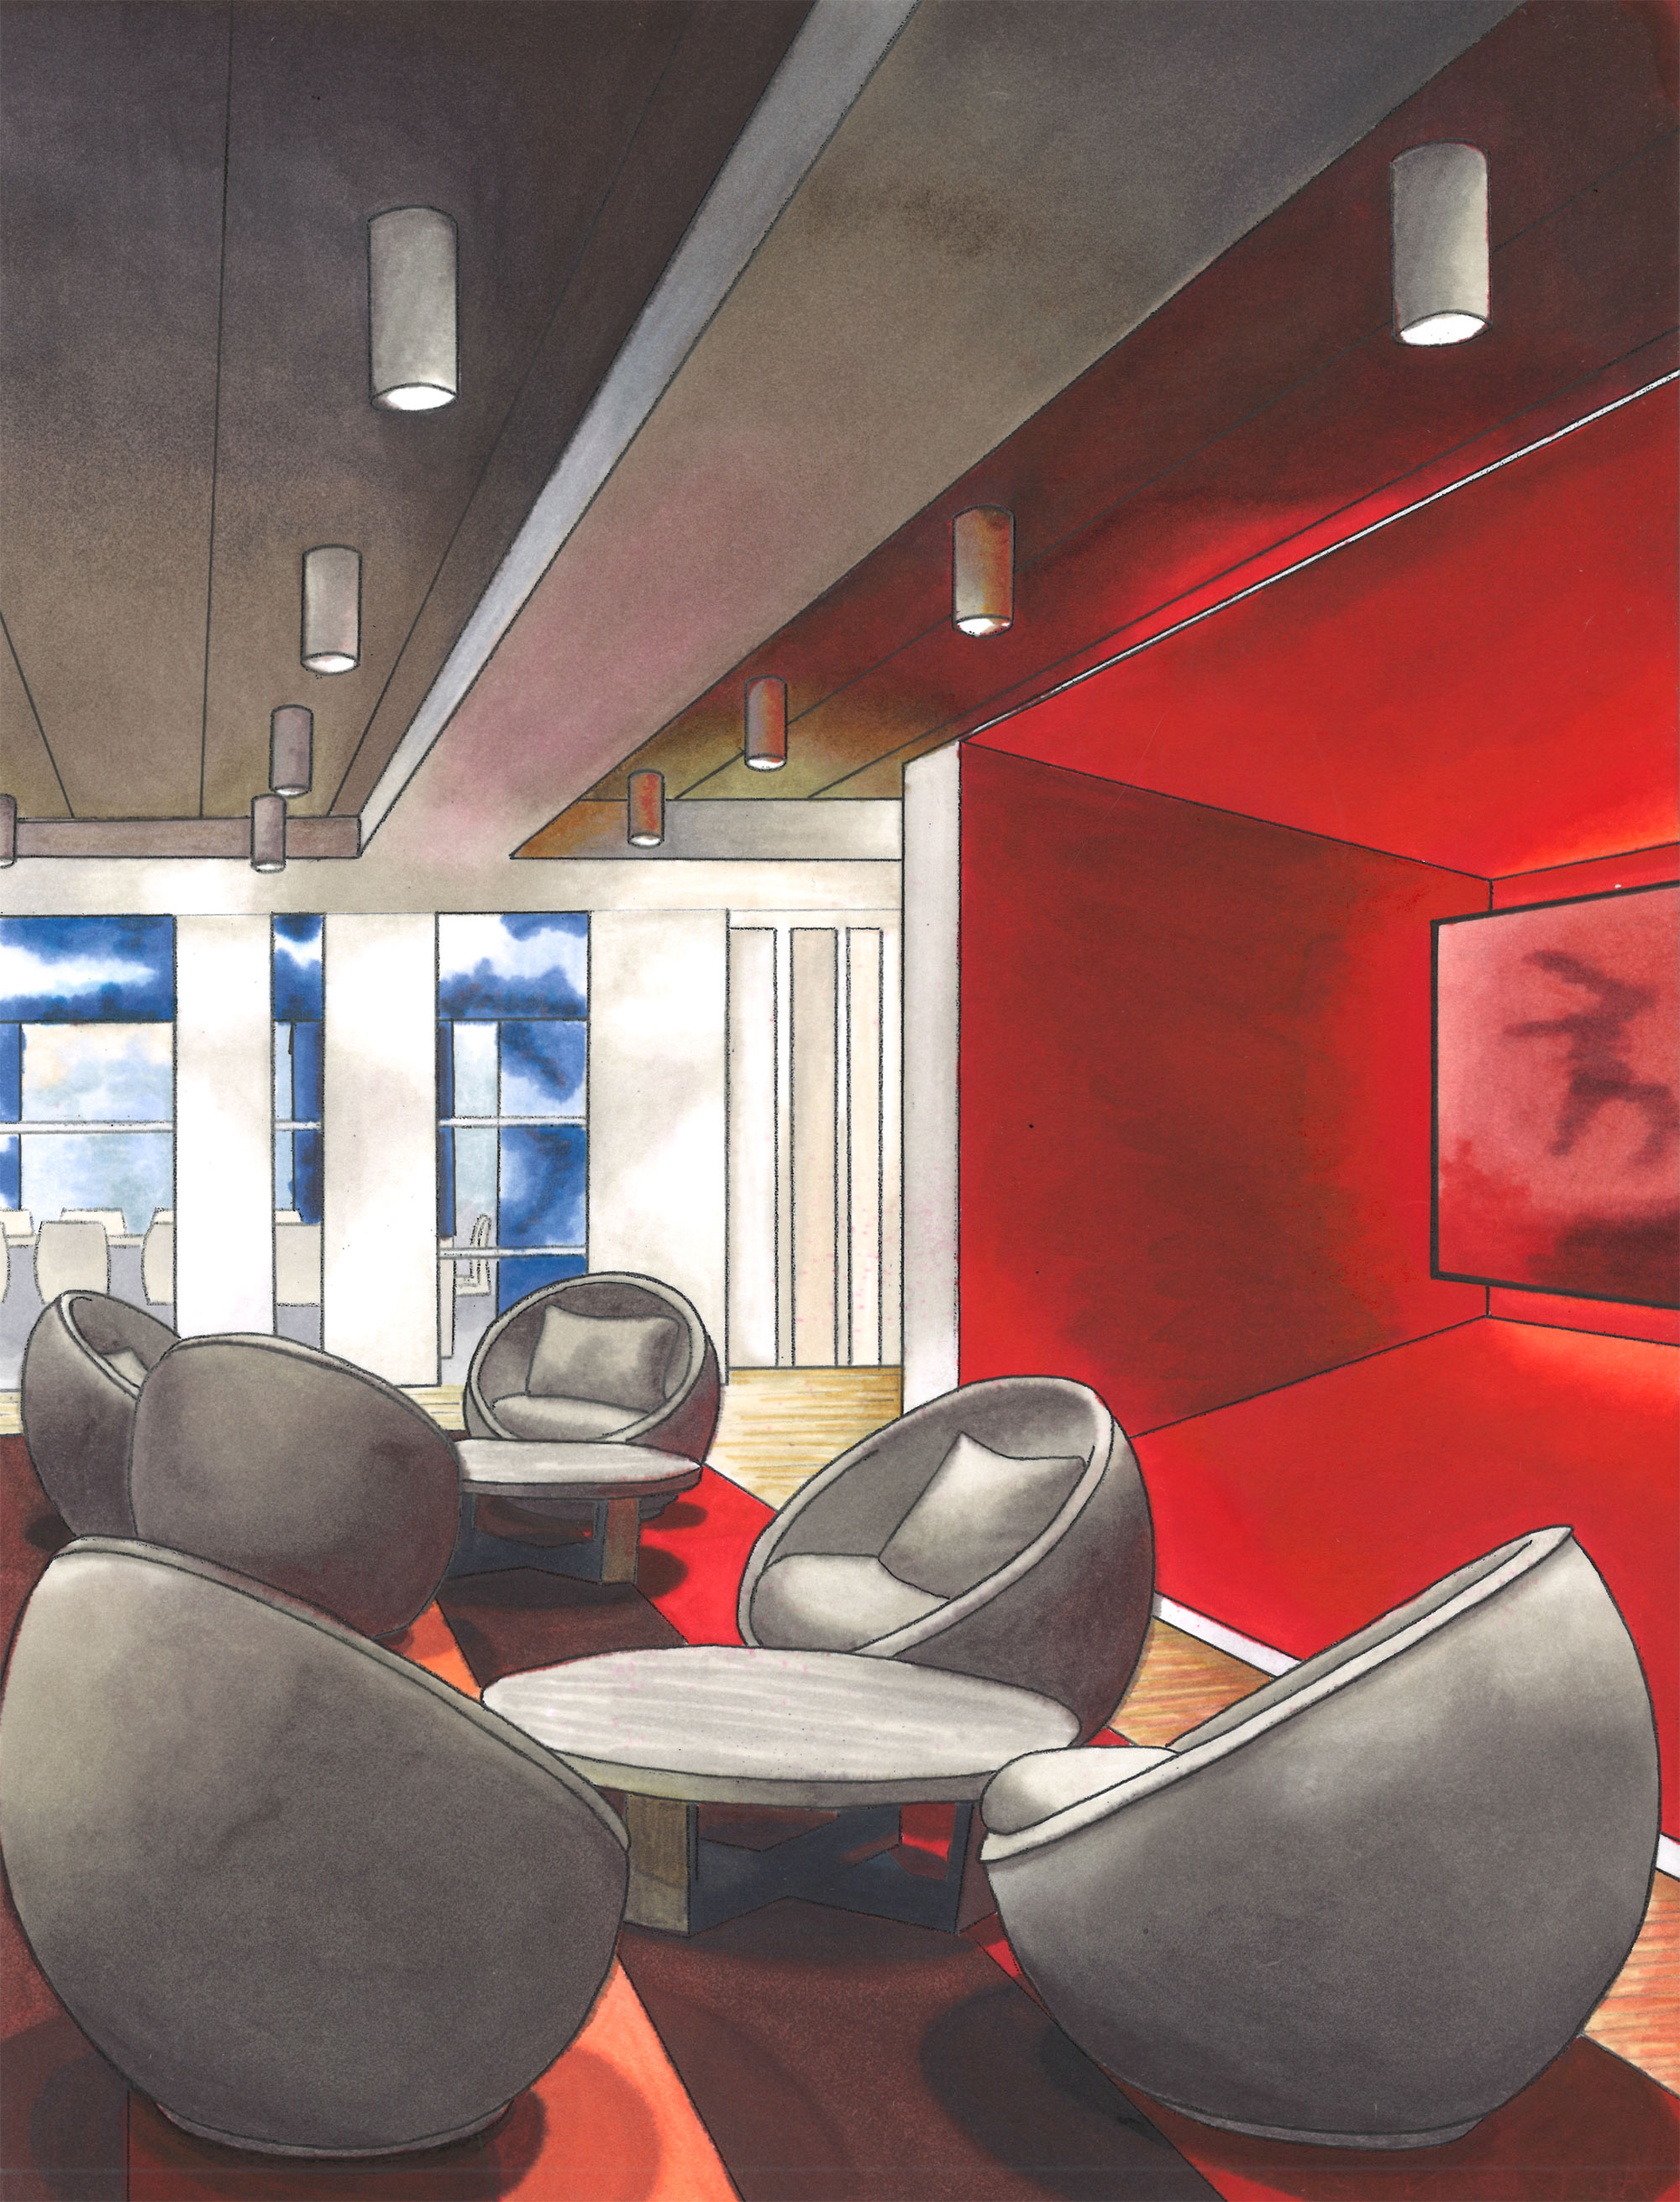 hand rendering - modern round gray chairs, red walls